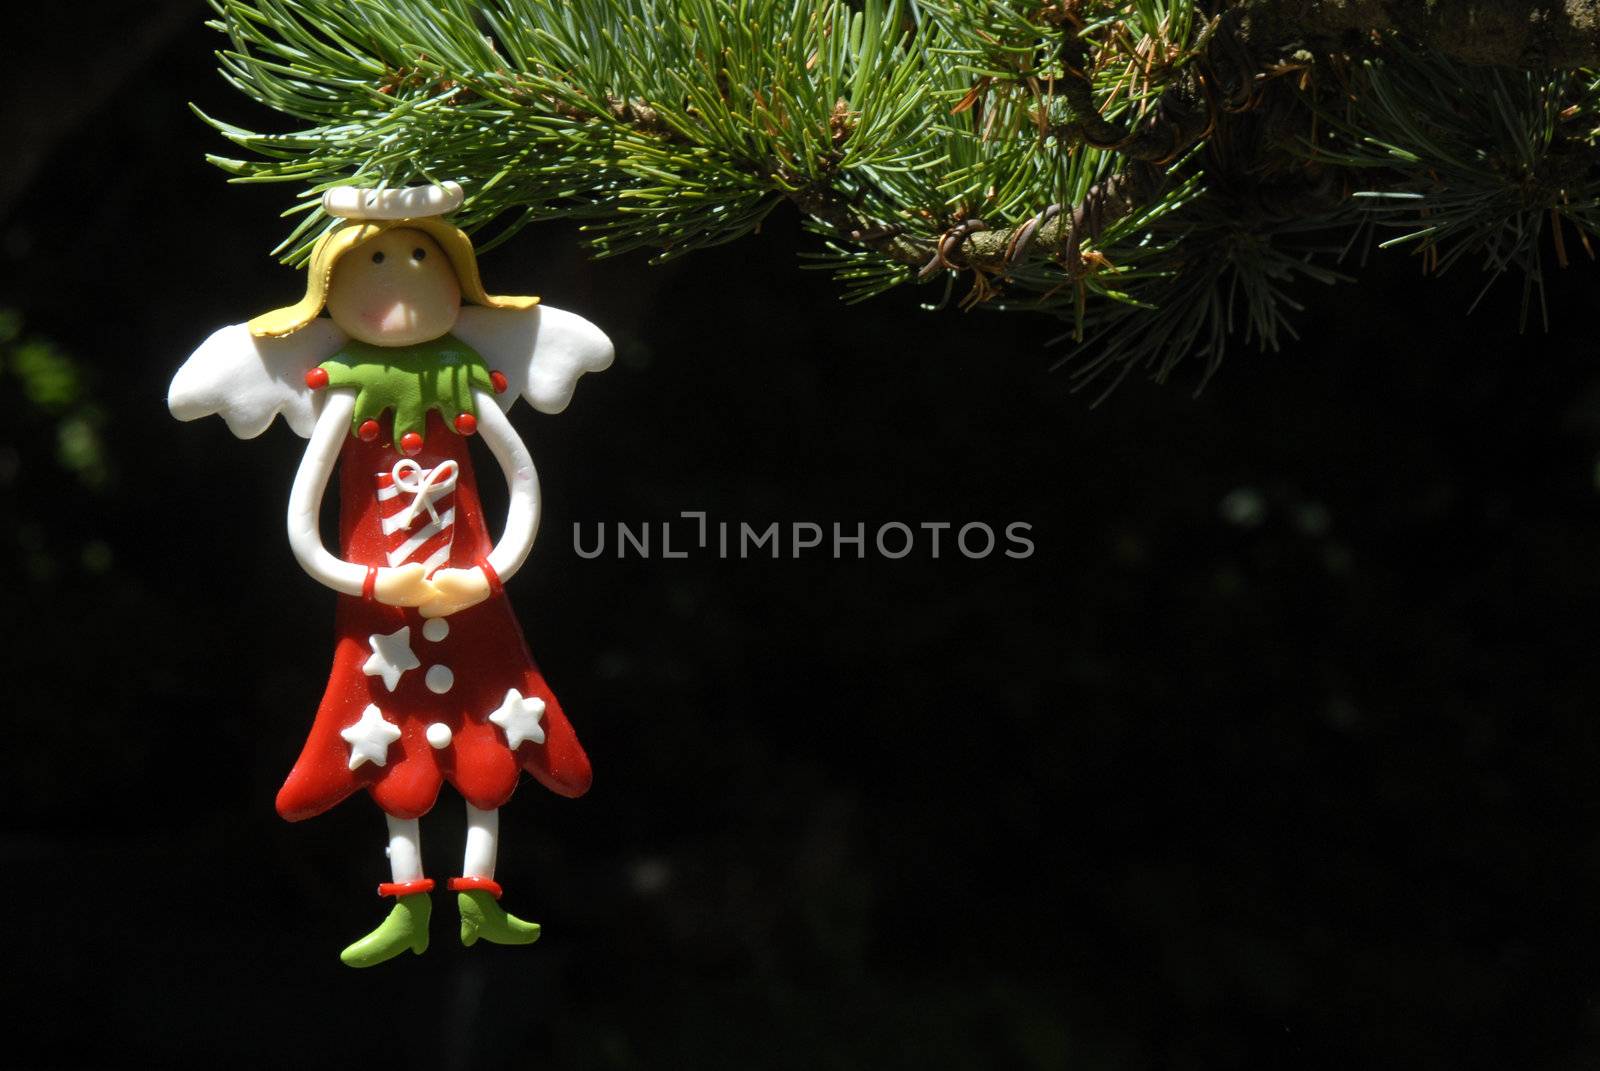 Angel hanging from Christmas tree by Carche